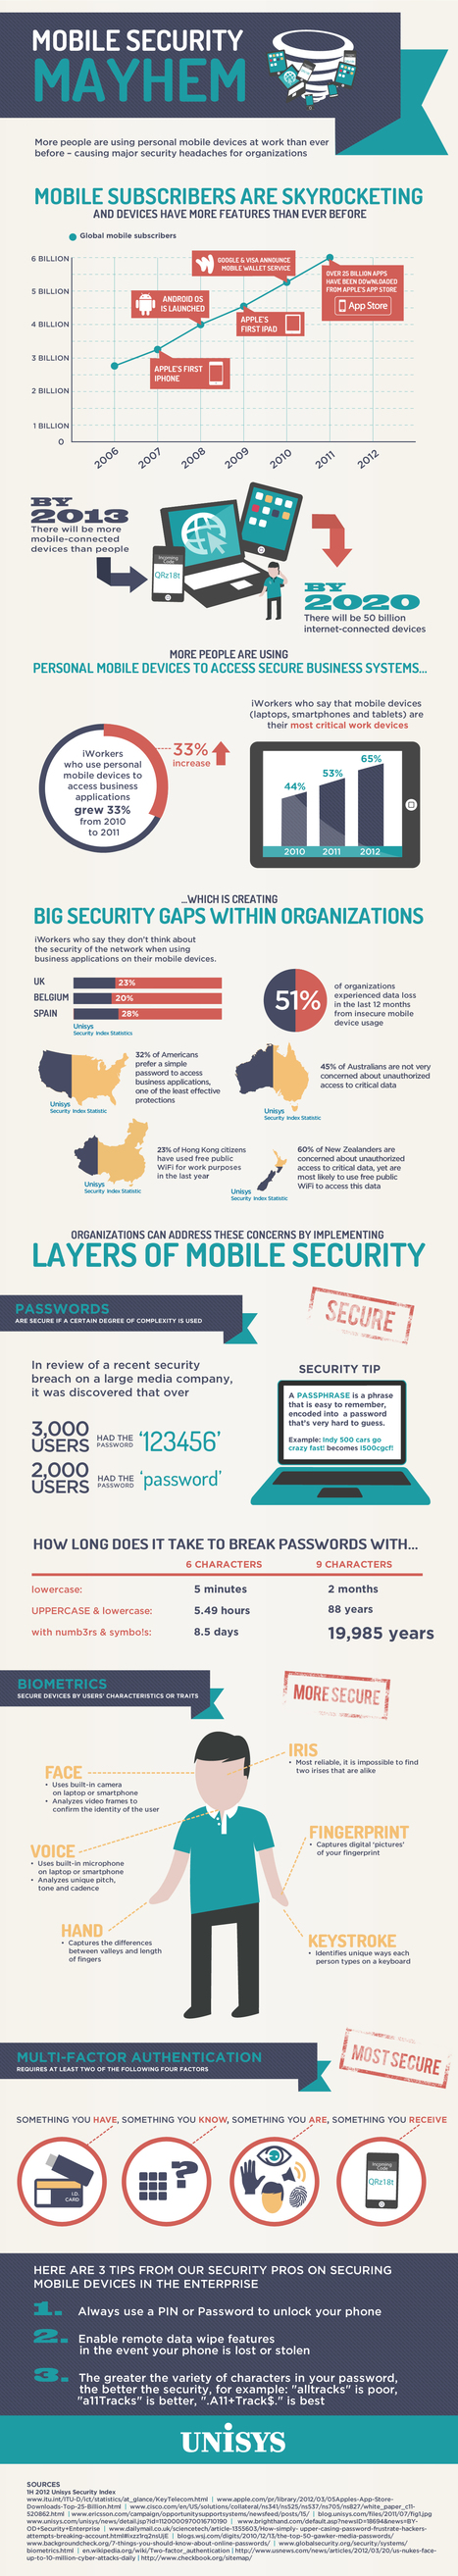 What Apple and Google are not Telling you About Mobile Device Security (infographic) - Forbes | 21st Century Learning and Teaching | Scoop.it